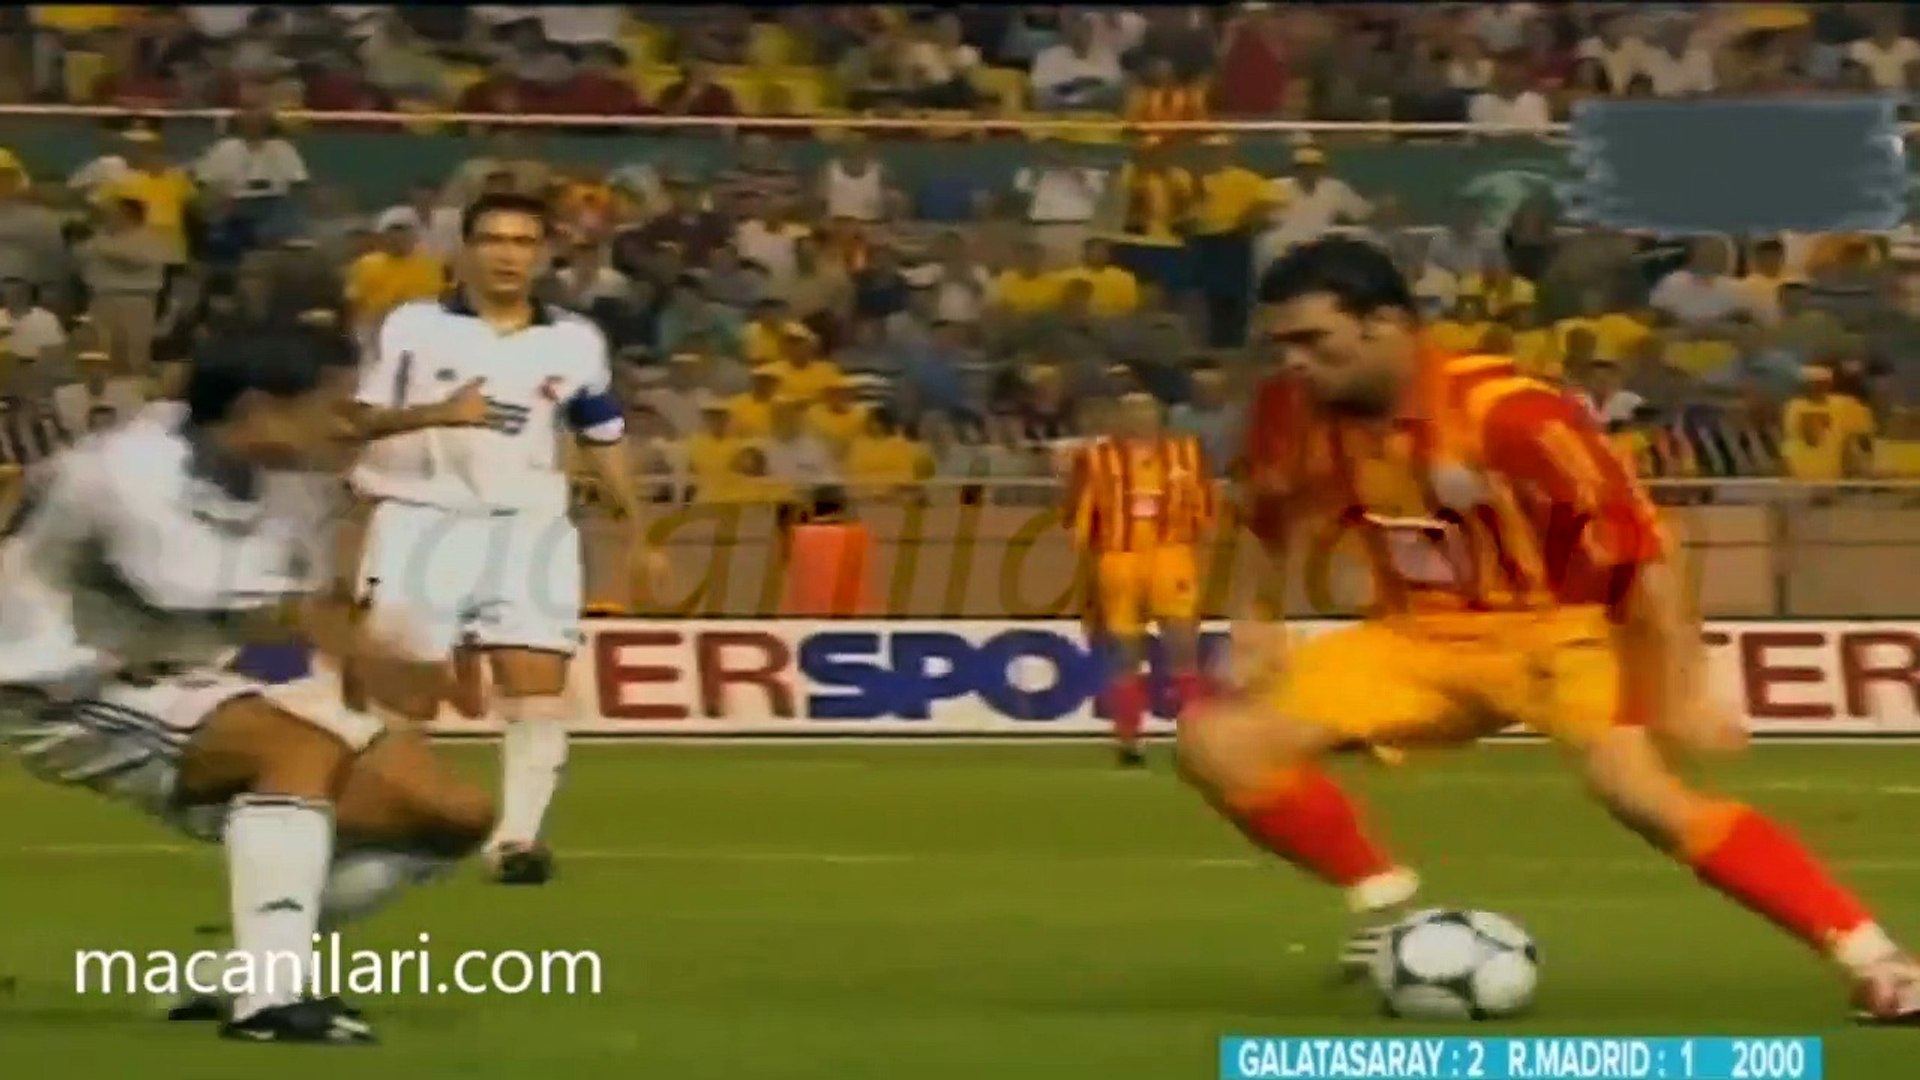 Galatasaray 2-1 Real Madrid (With Golden Goal) [HD] 25.08.2000 - 2000 UEFA  Super Cup Final Match